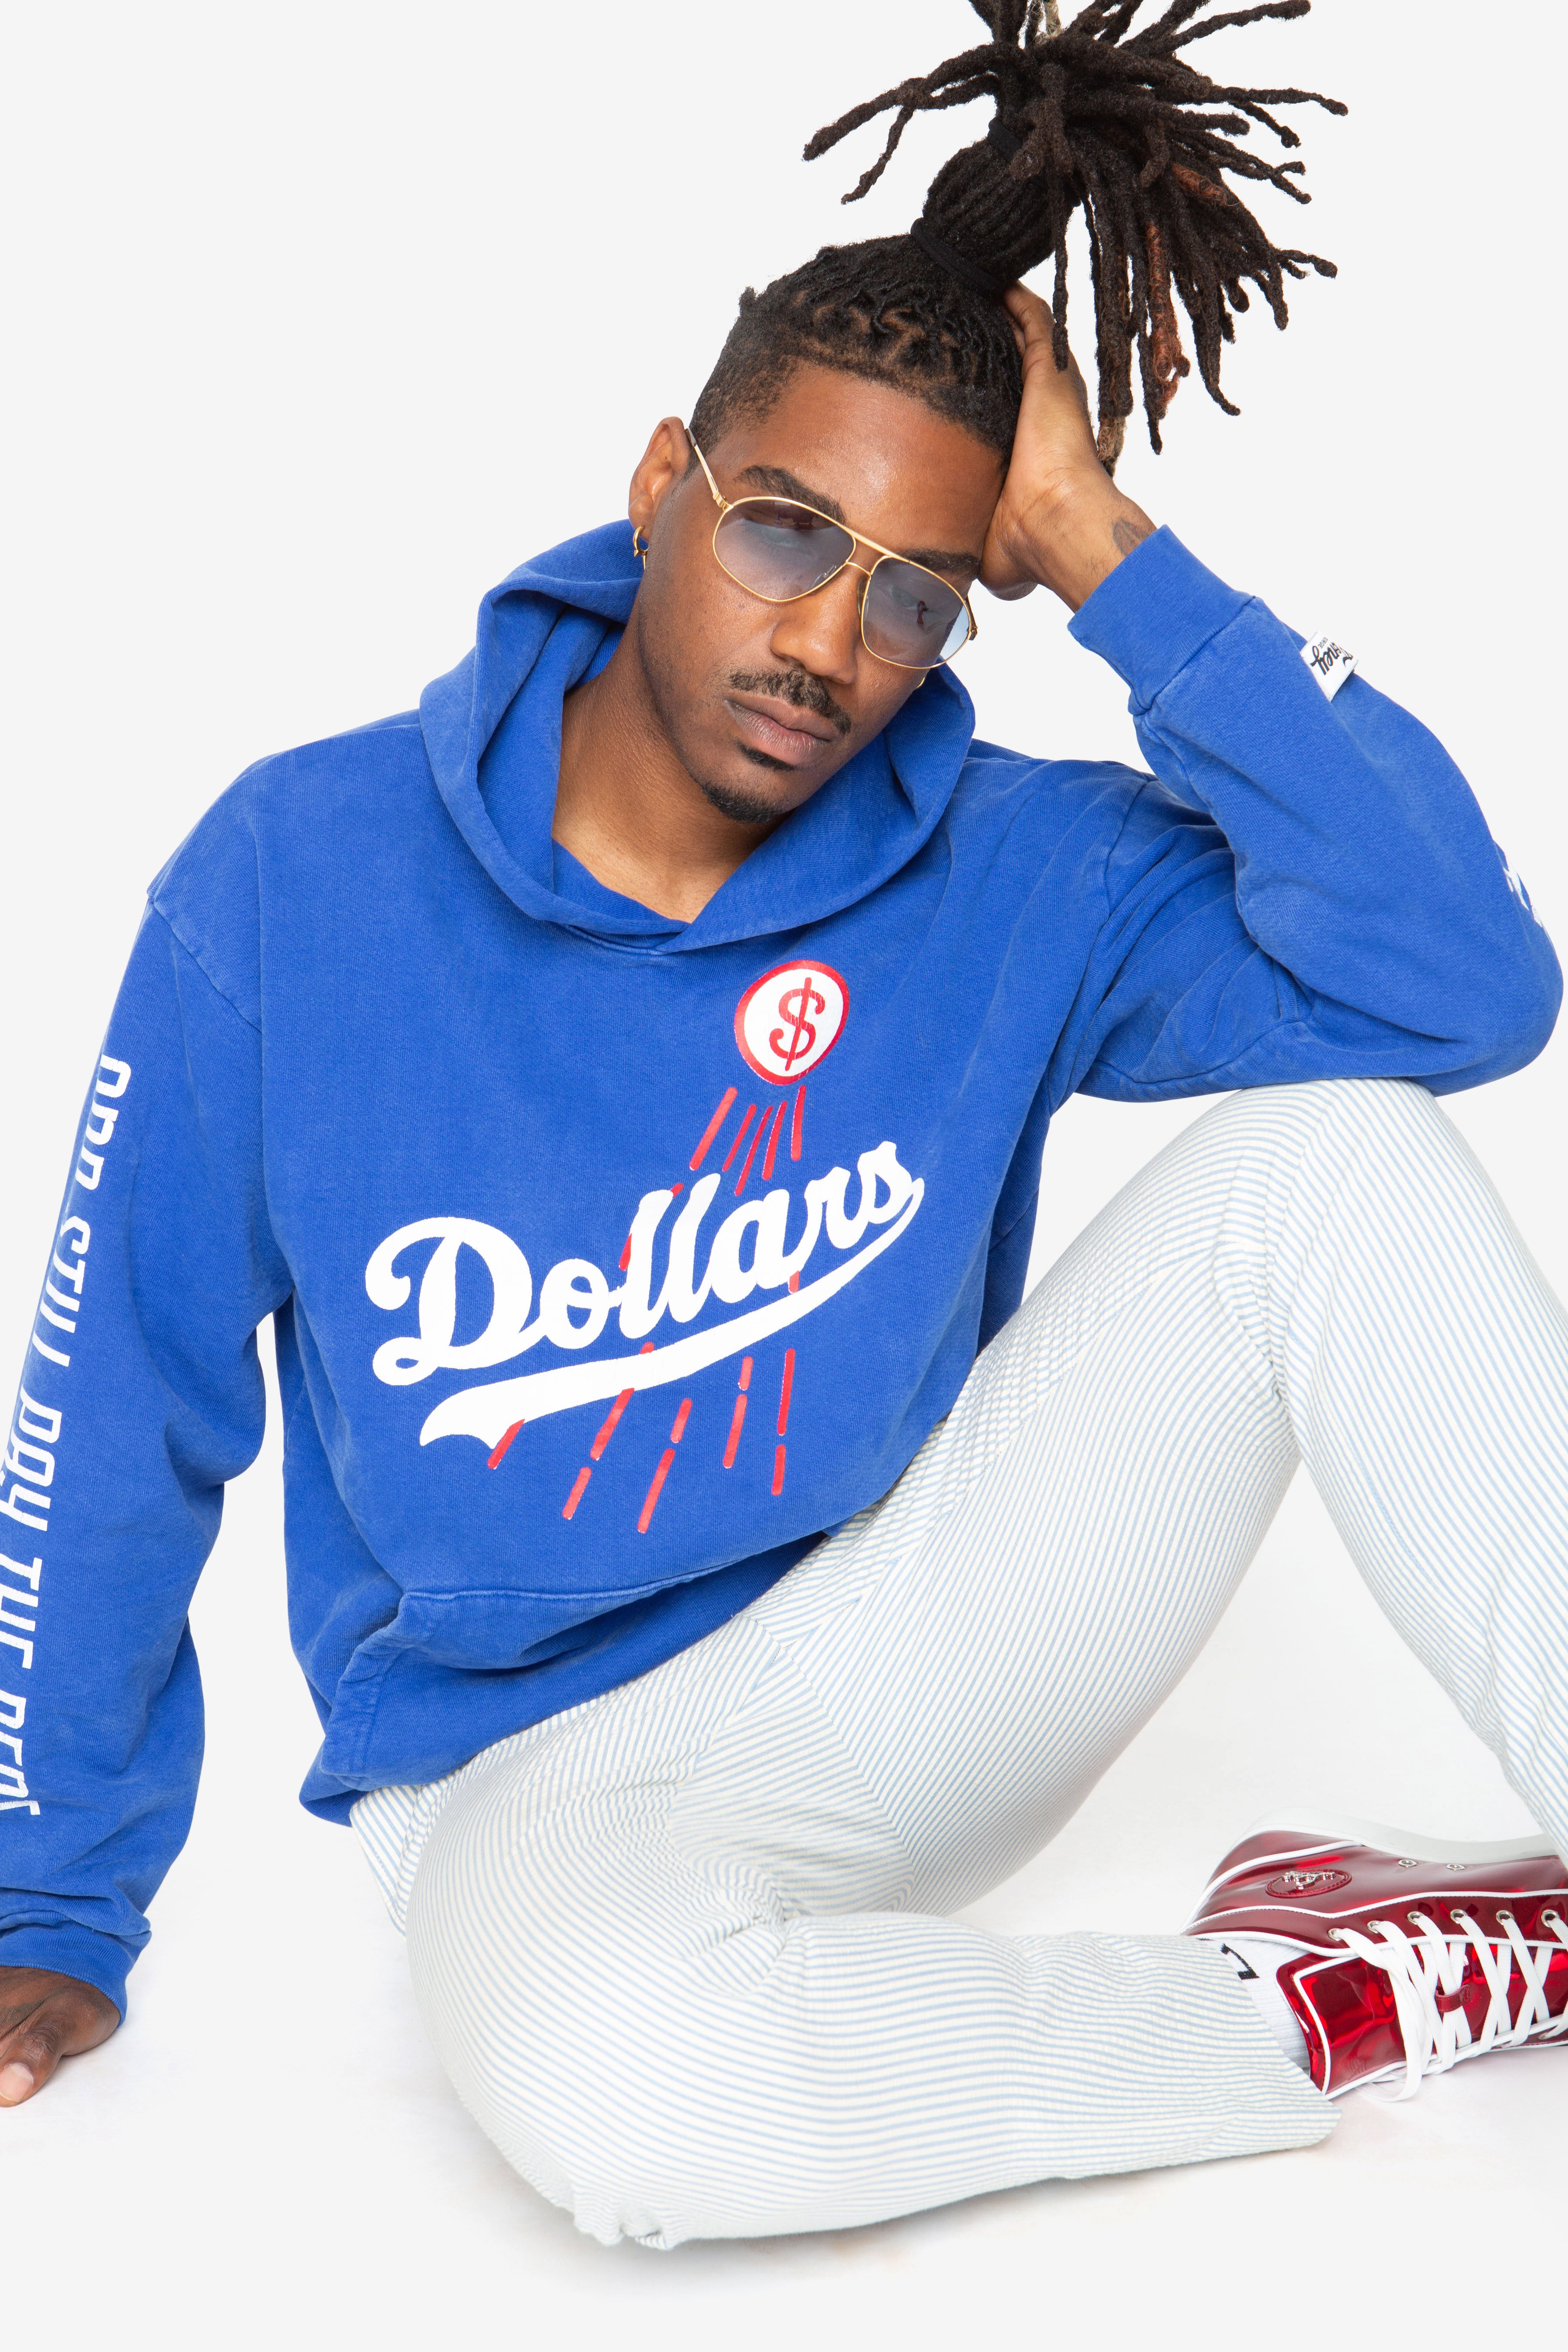 Dollars / CLONEY Tupac – Out Hoodie 15 of Sweatshirt Cents